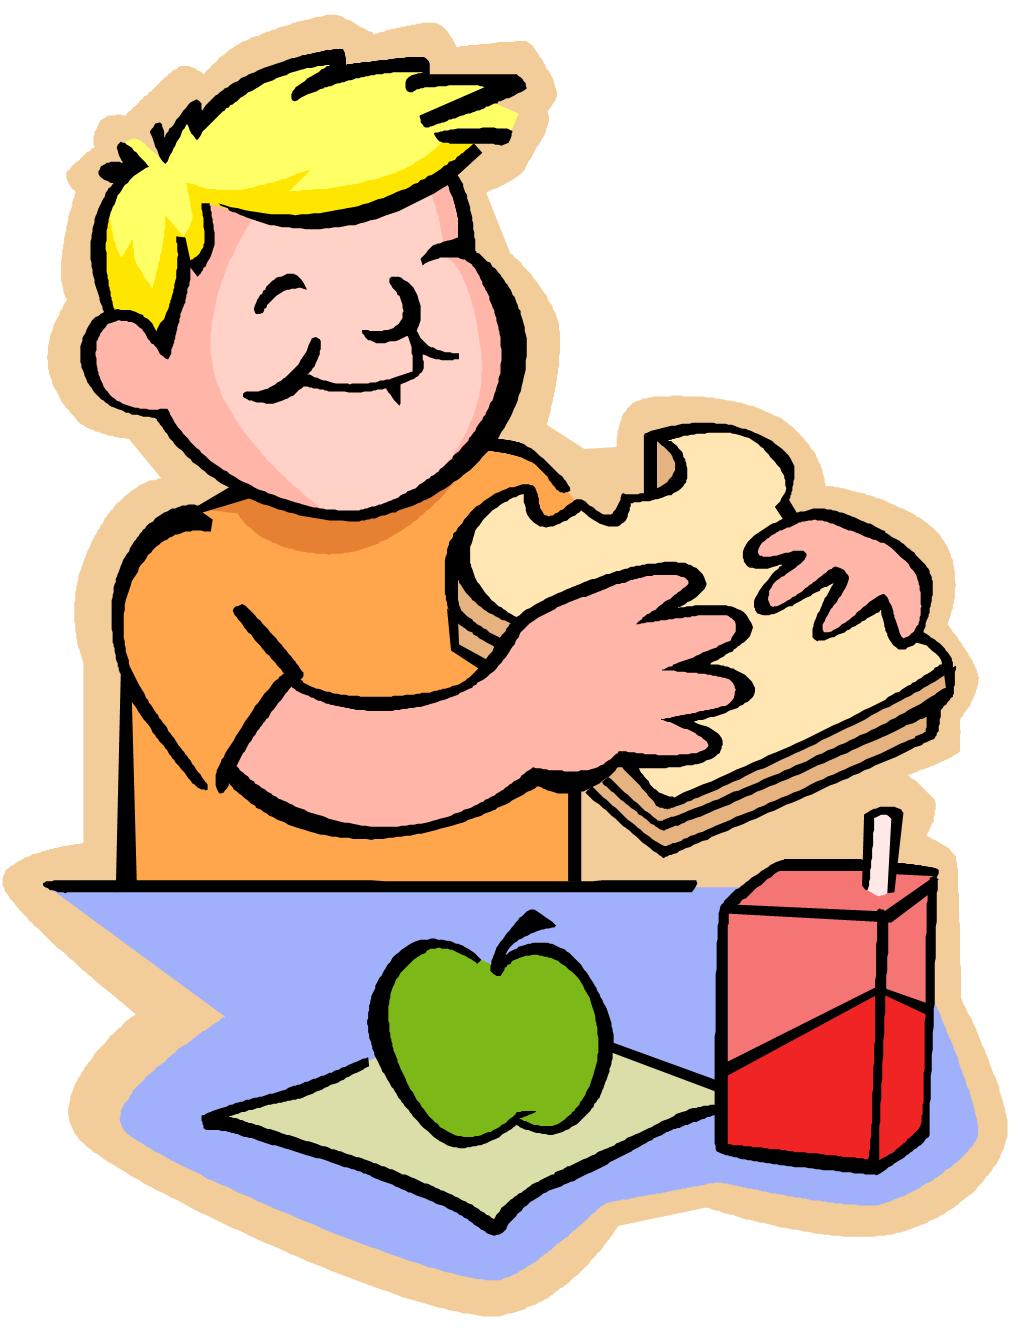 Lunch time clip art free clipart images 3